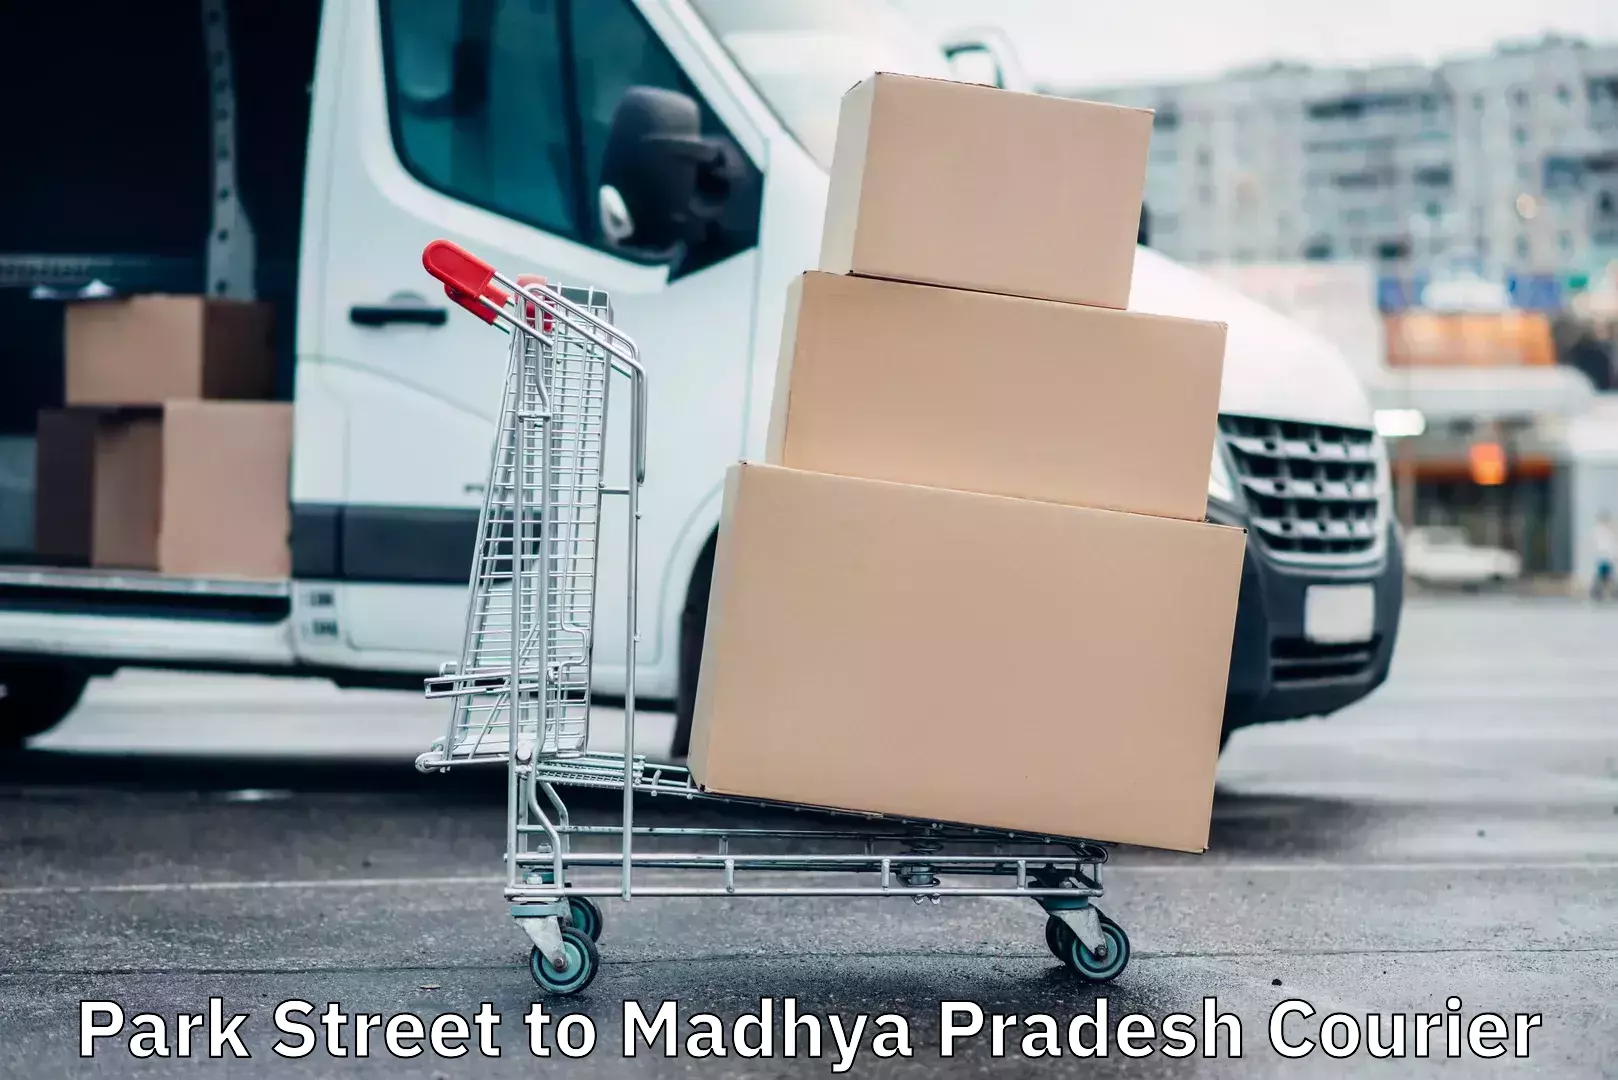 Corporate courier solutions Park Street to Madhya Pradesh